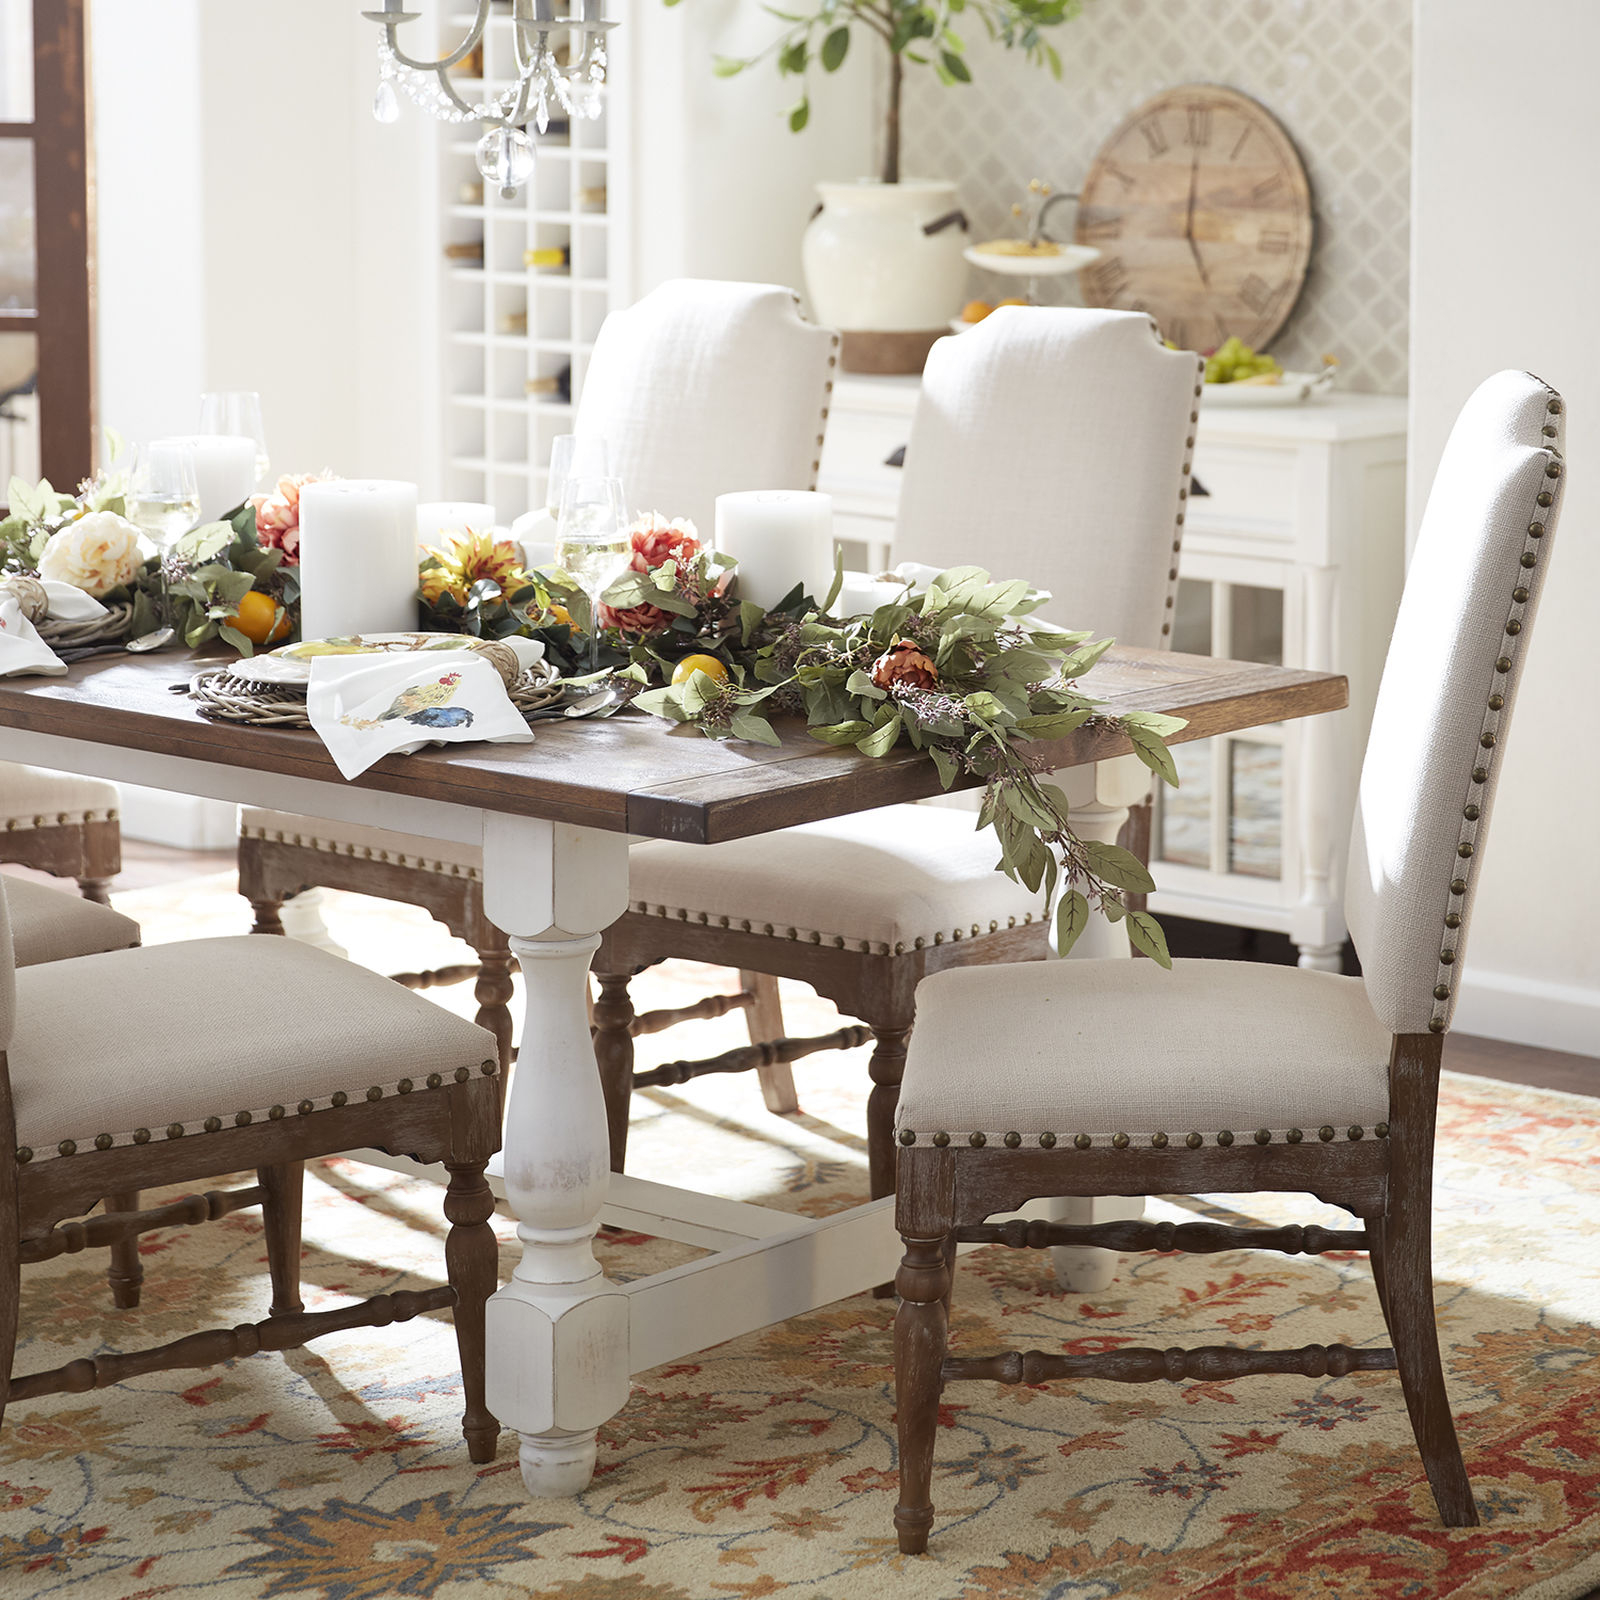 Pier One Dining Table Freshsdg within dimensions 1600 X 1600